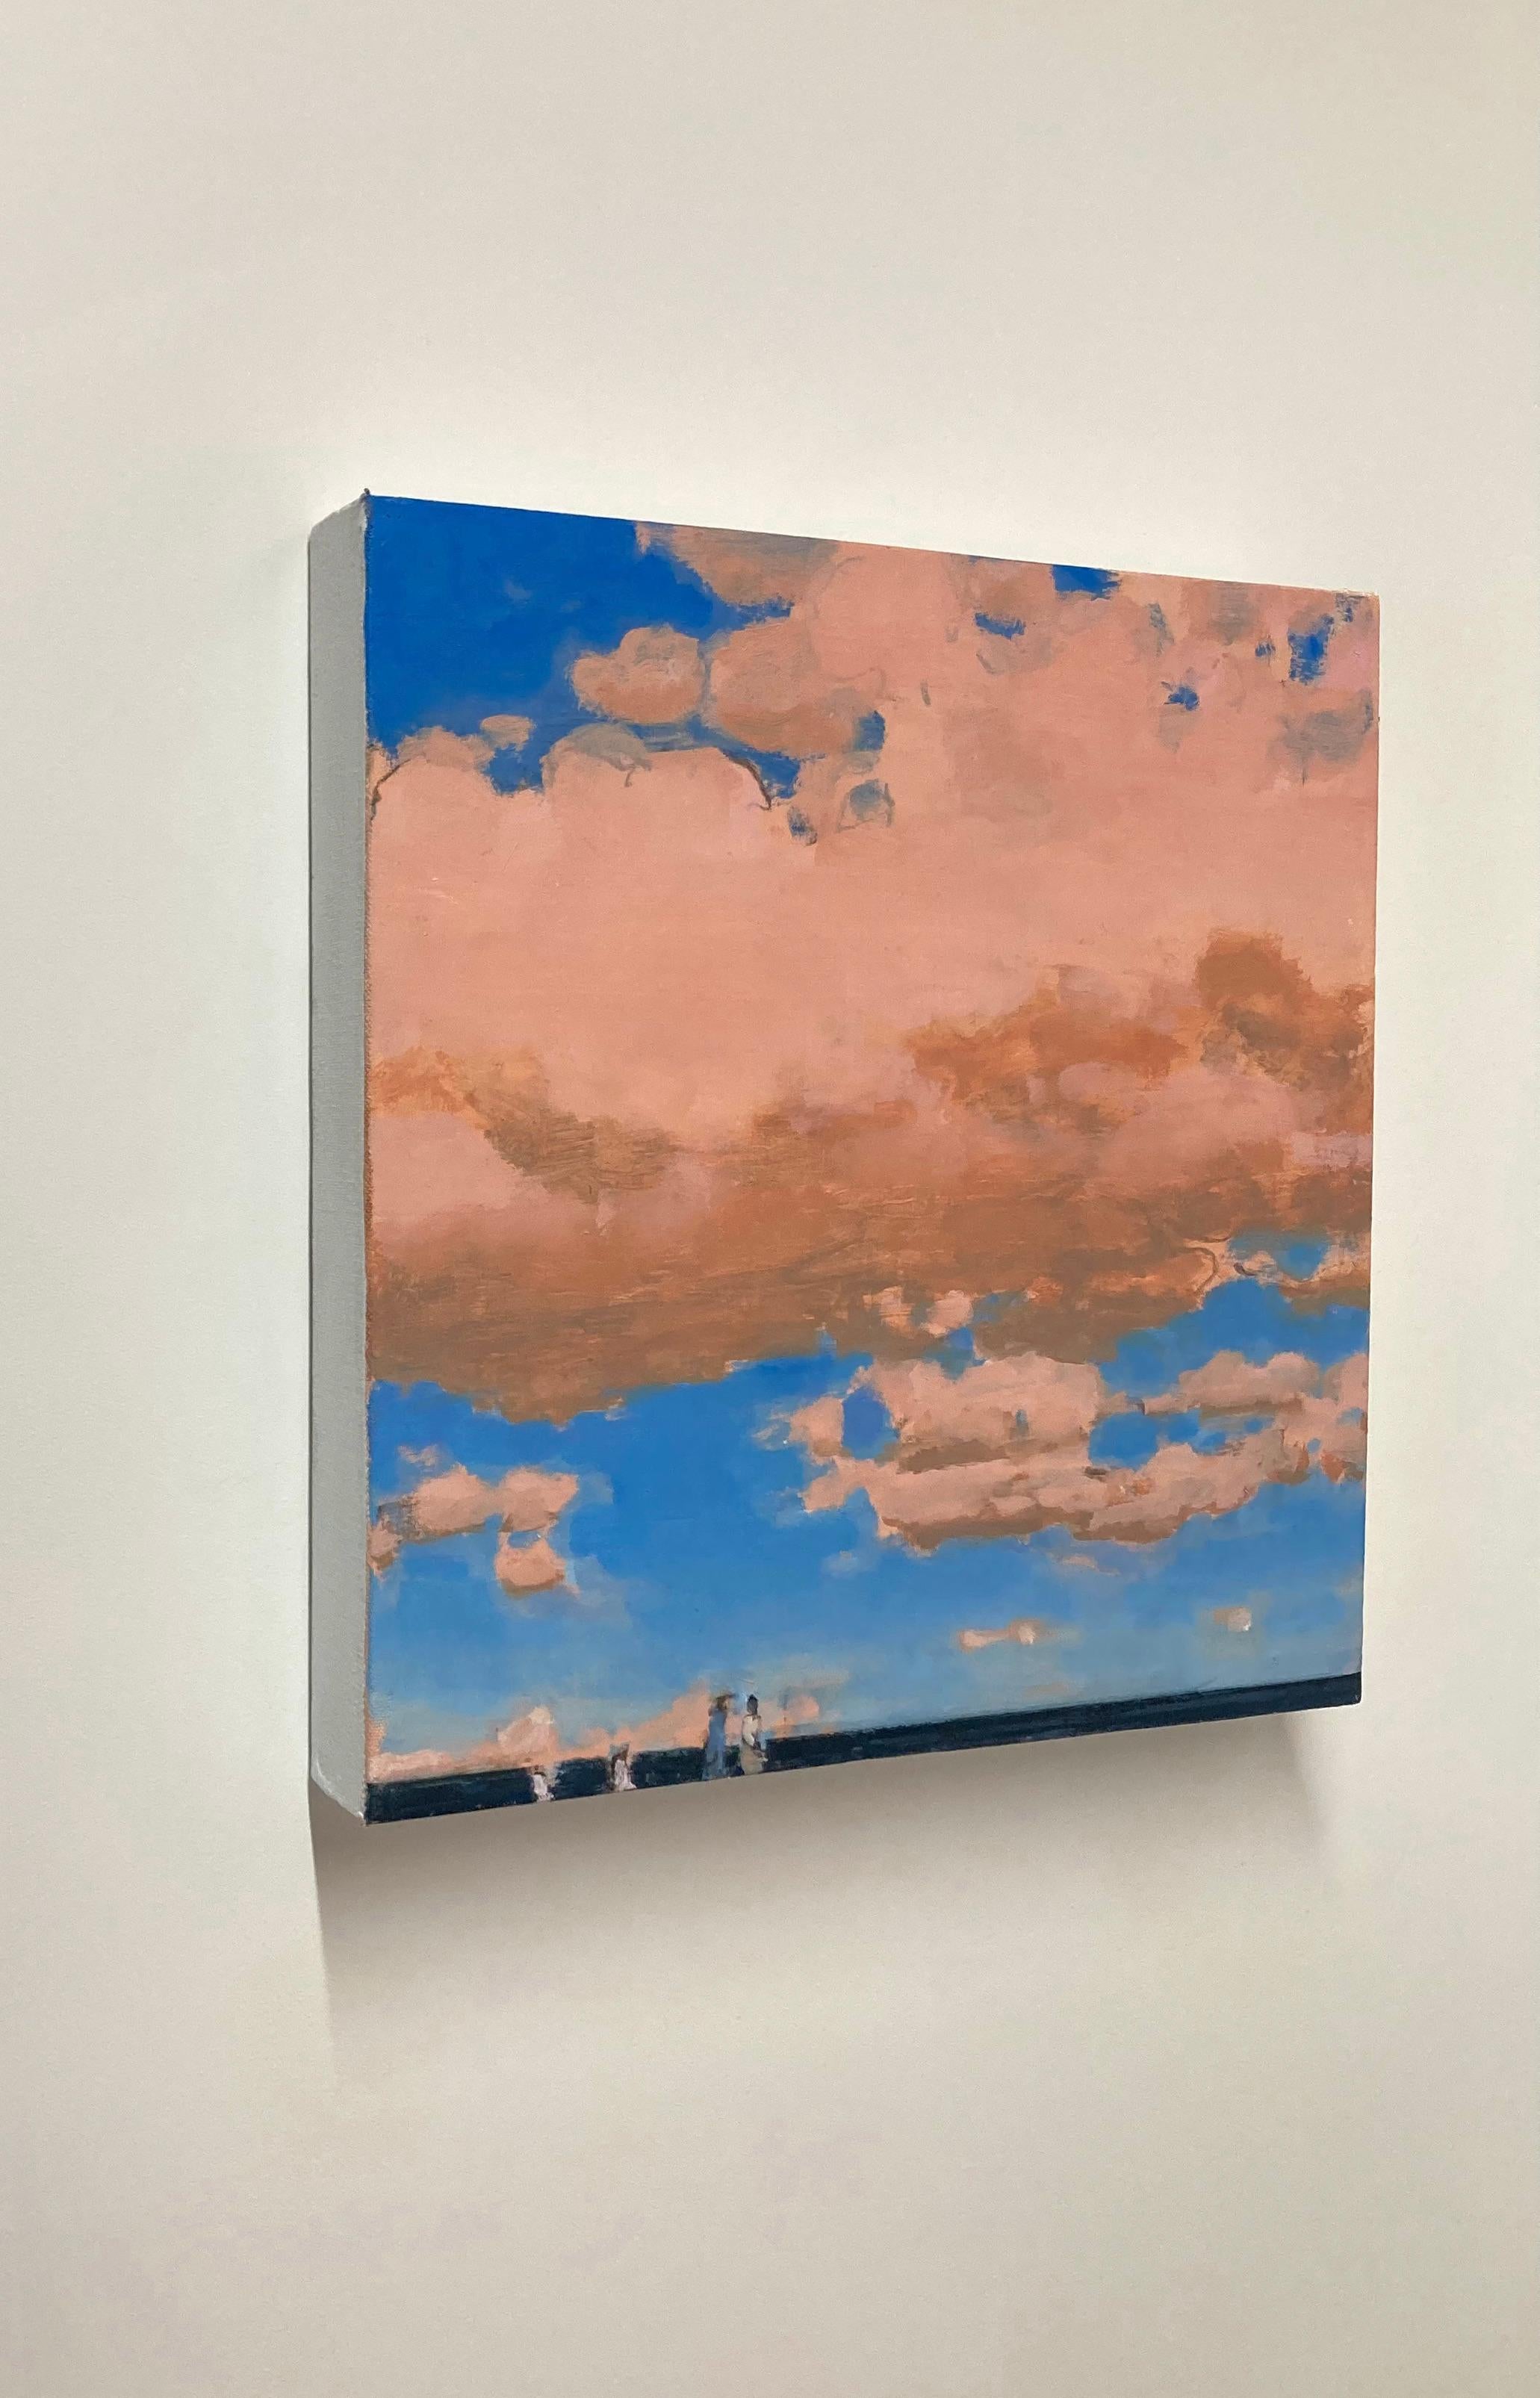 A few figures can be seen by the shore of a beach, appearing to gaze out at the deep, dark navy blue ocean, while fluffy, pale salmon pink cumulus clouds float in the idyllic blue sky overhead. Signed, dated and titled on verso.

David Konigsberg